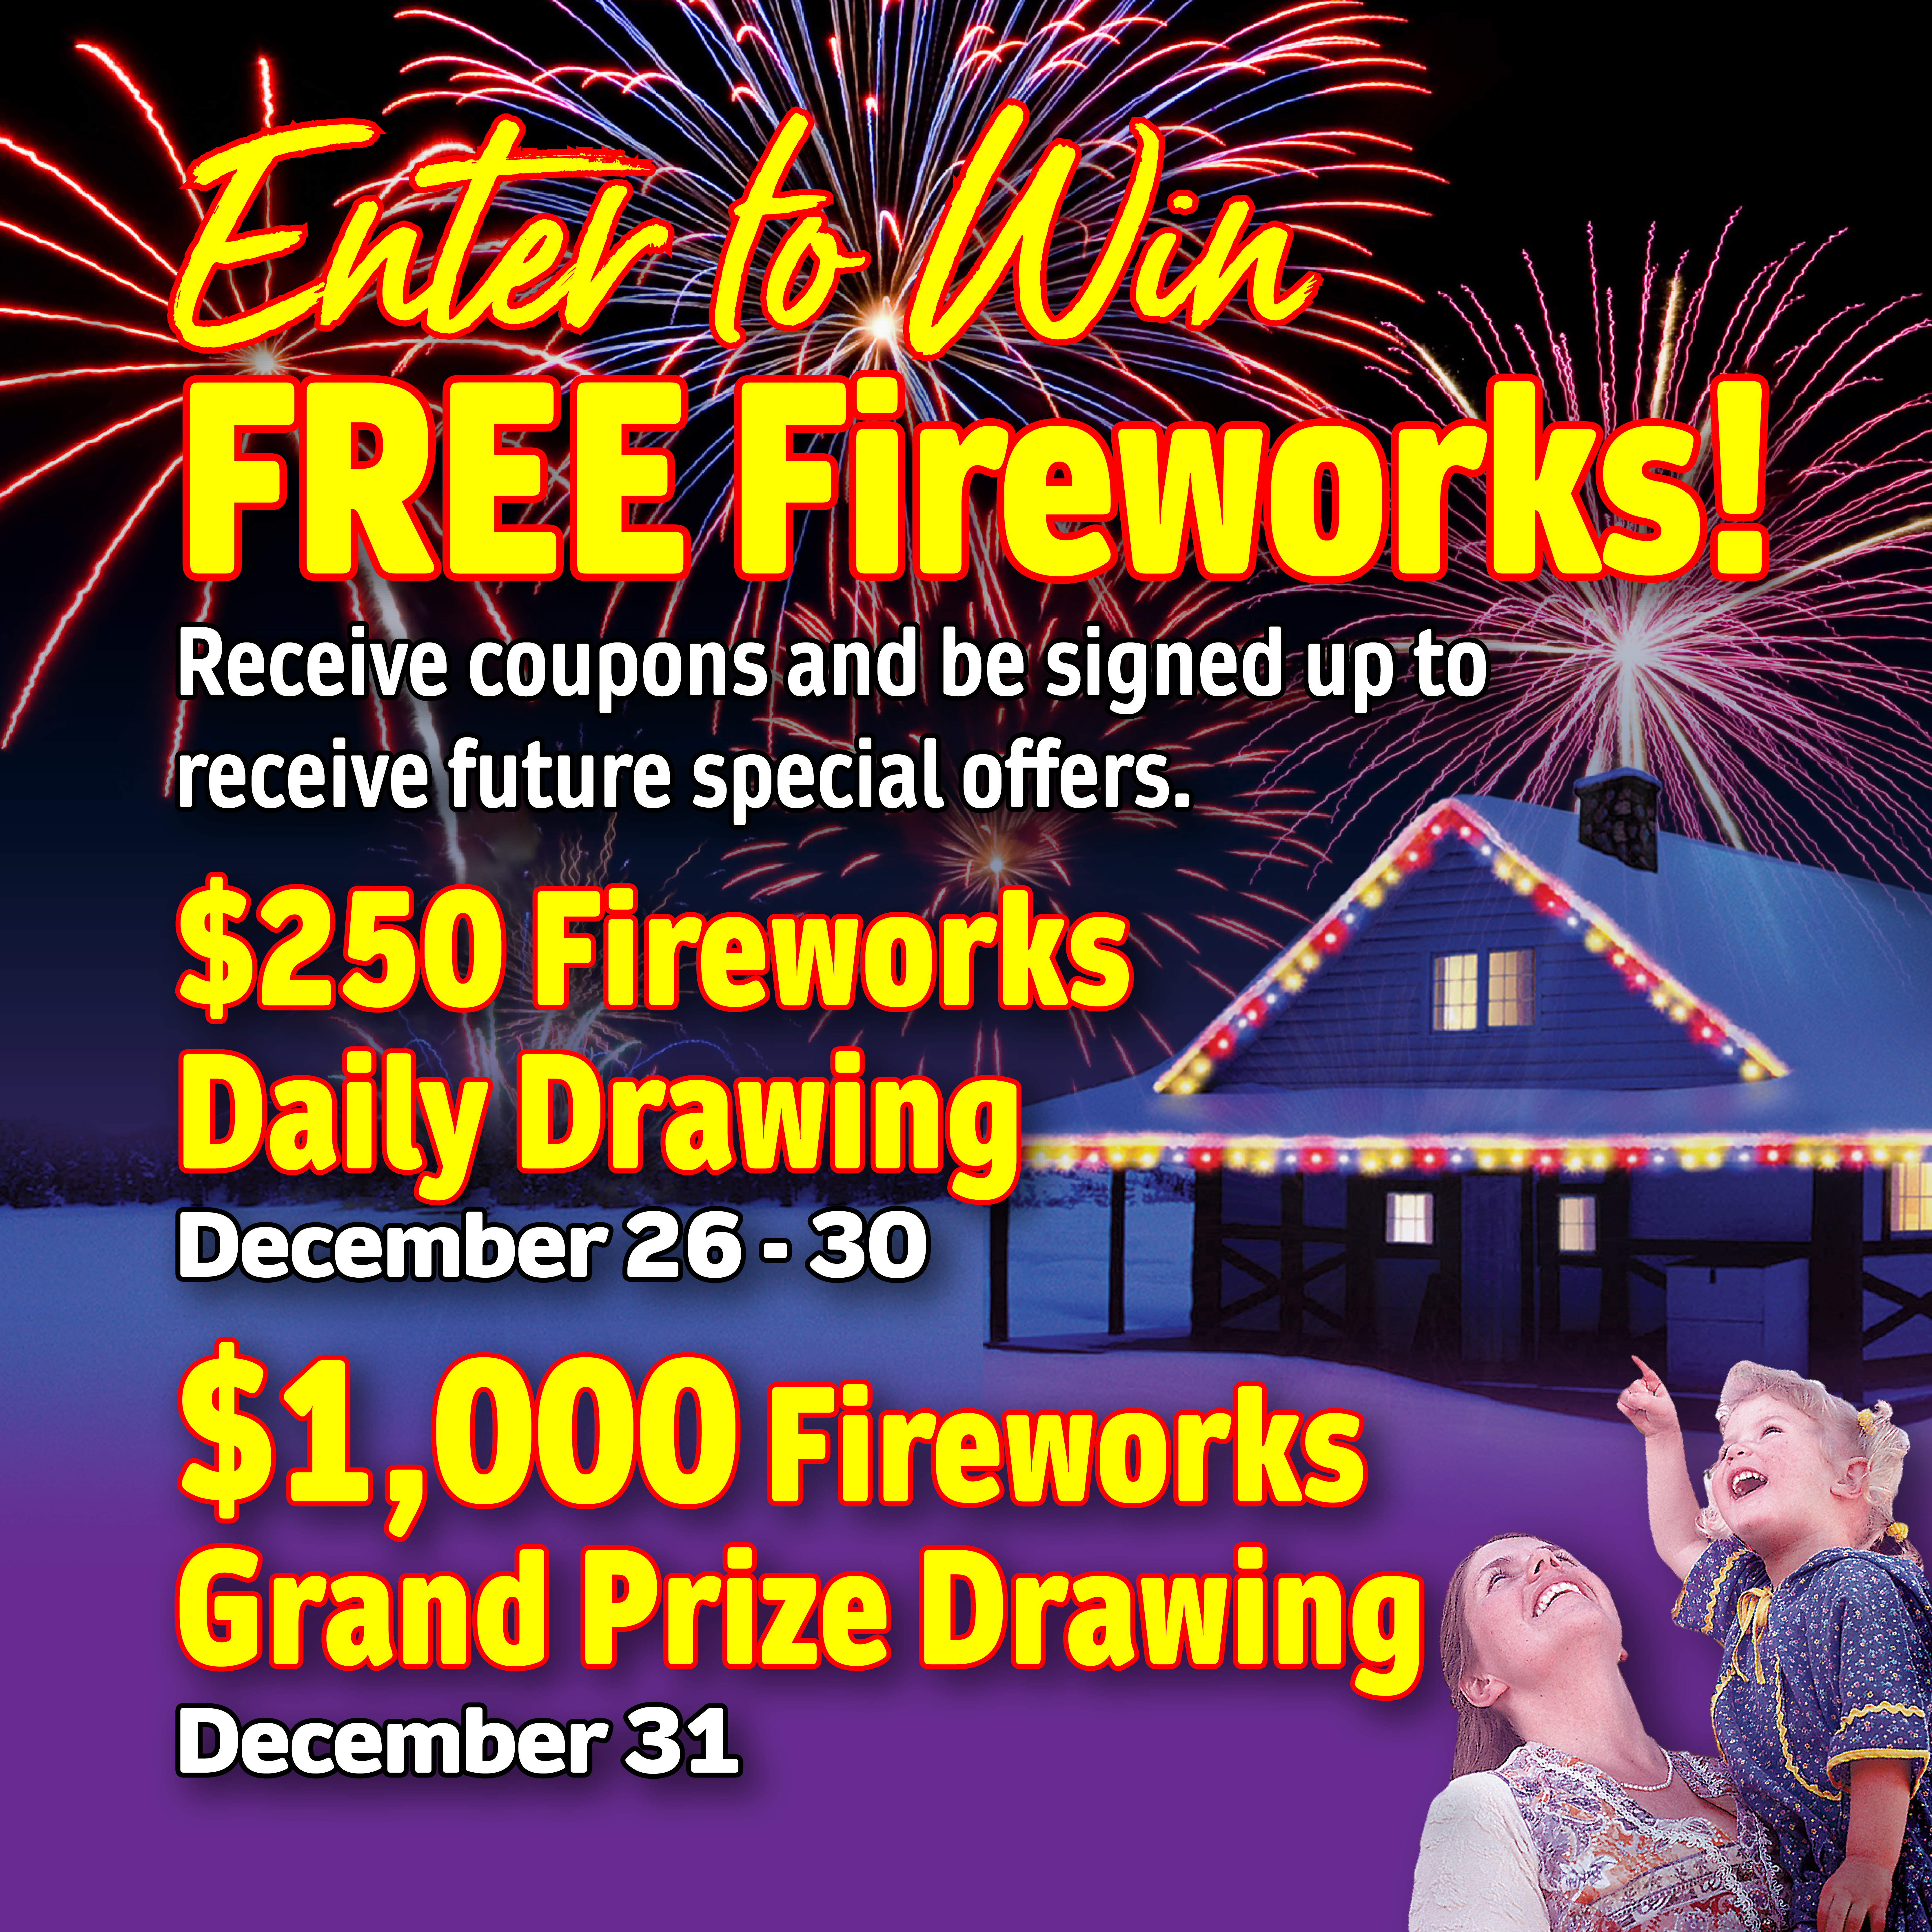 Enter to Win FREE Fireworks! Receive coupons and be signed up to receive future special offers. $250 Fireworks Daily Drawing December 26-30, 2023; $1000 Fireworks Grand Prize Drawing December 31, 2022